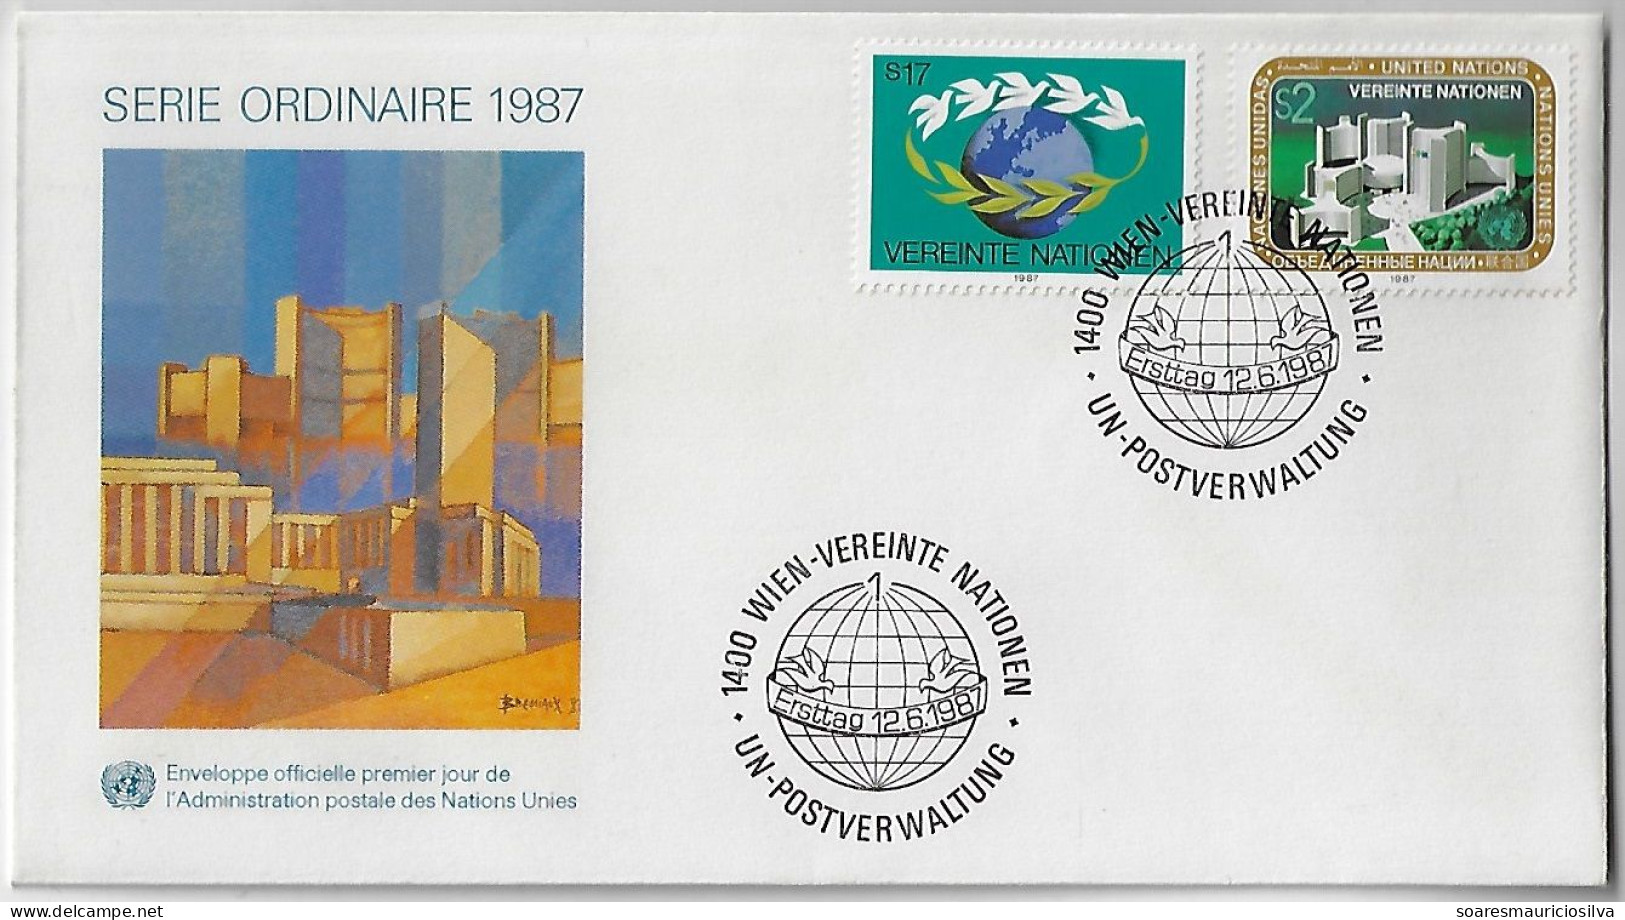 United Nations 1987 FDC 1st Day Cover Definitive Stamp Series Postamark Earth Globe Meridians Doves Of Peace From Vienna - FDC